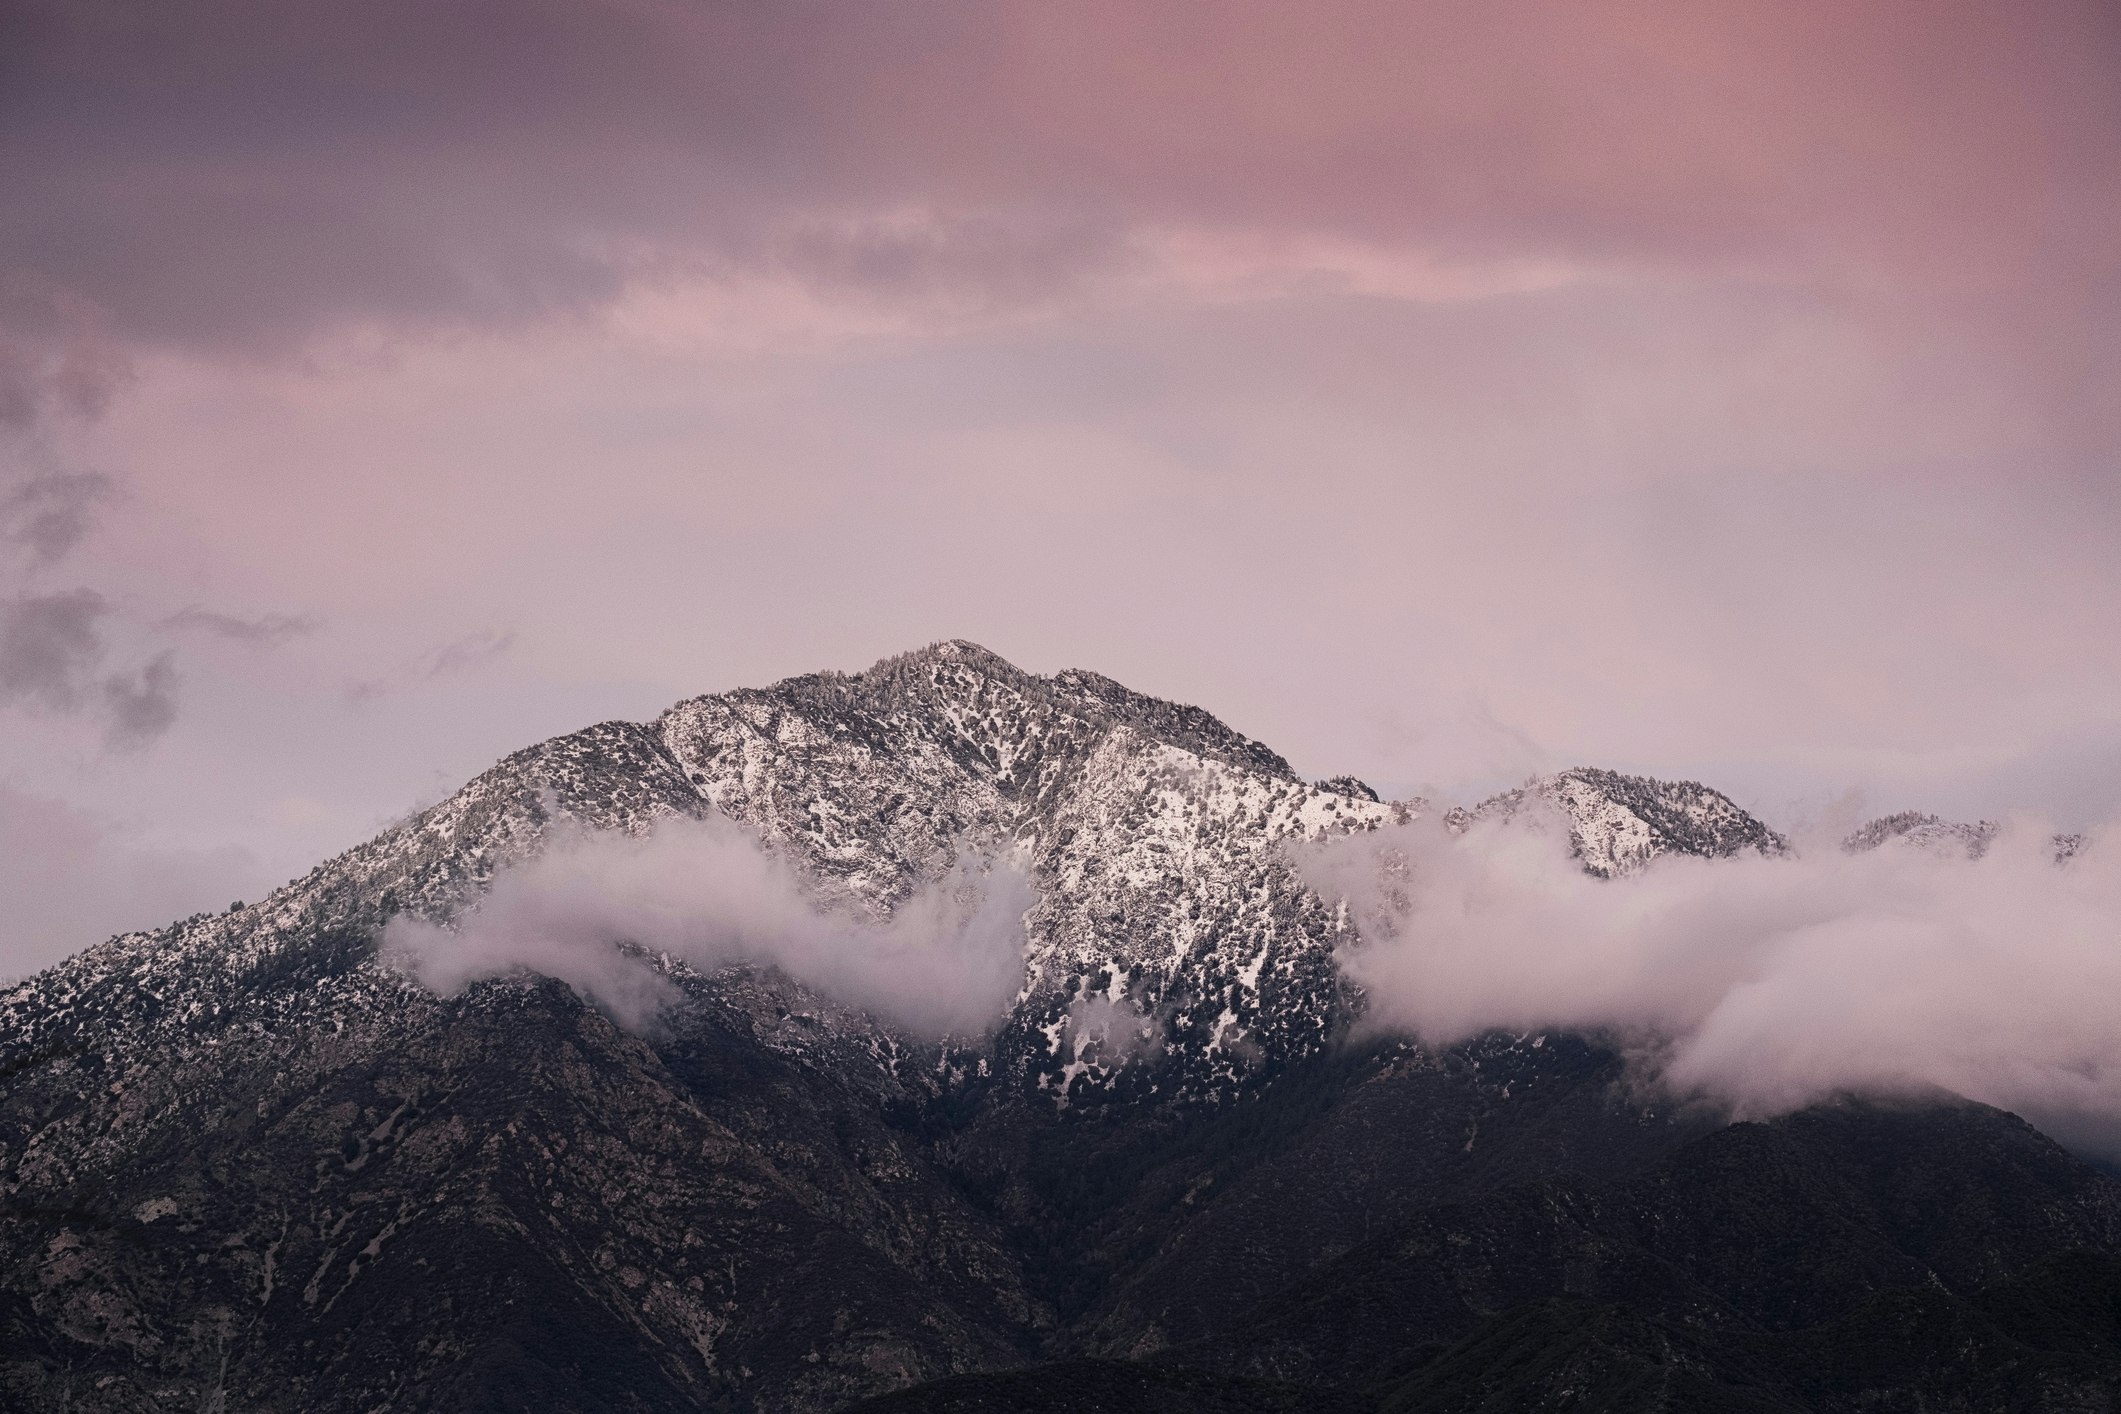 The grey, snow-dusted summit of Mt. Waterman in Angeles National Forest in the San Gabriel Mountains overlooking Los Angeles is ringed with wispy clouds tinted pink by the sunset, which lights the whole sky in pastel lavenders and dusty rose, and contrasts with the dark shadow of the mountain in the lower third of the shot, 